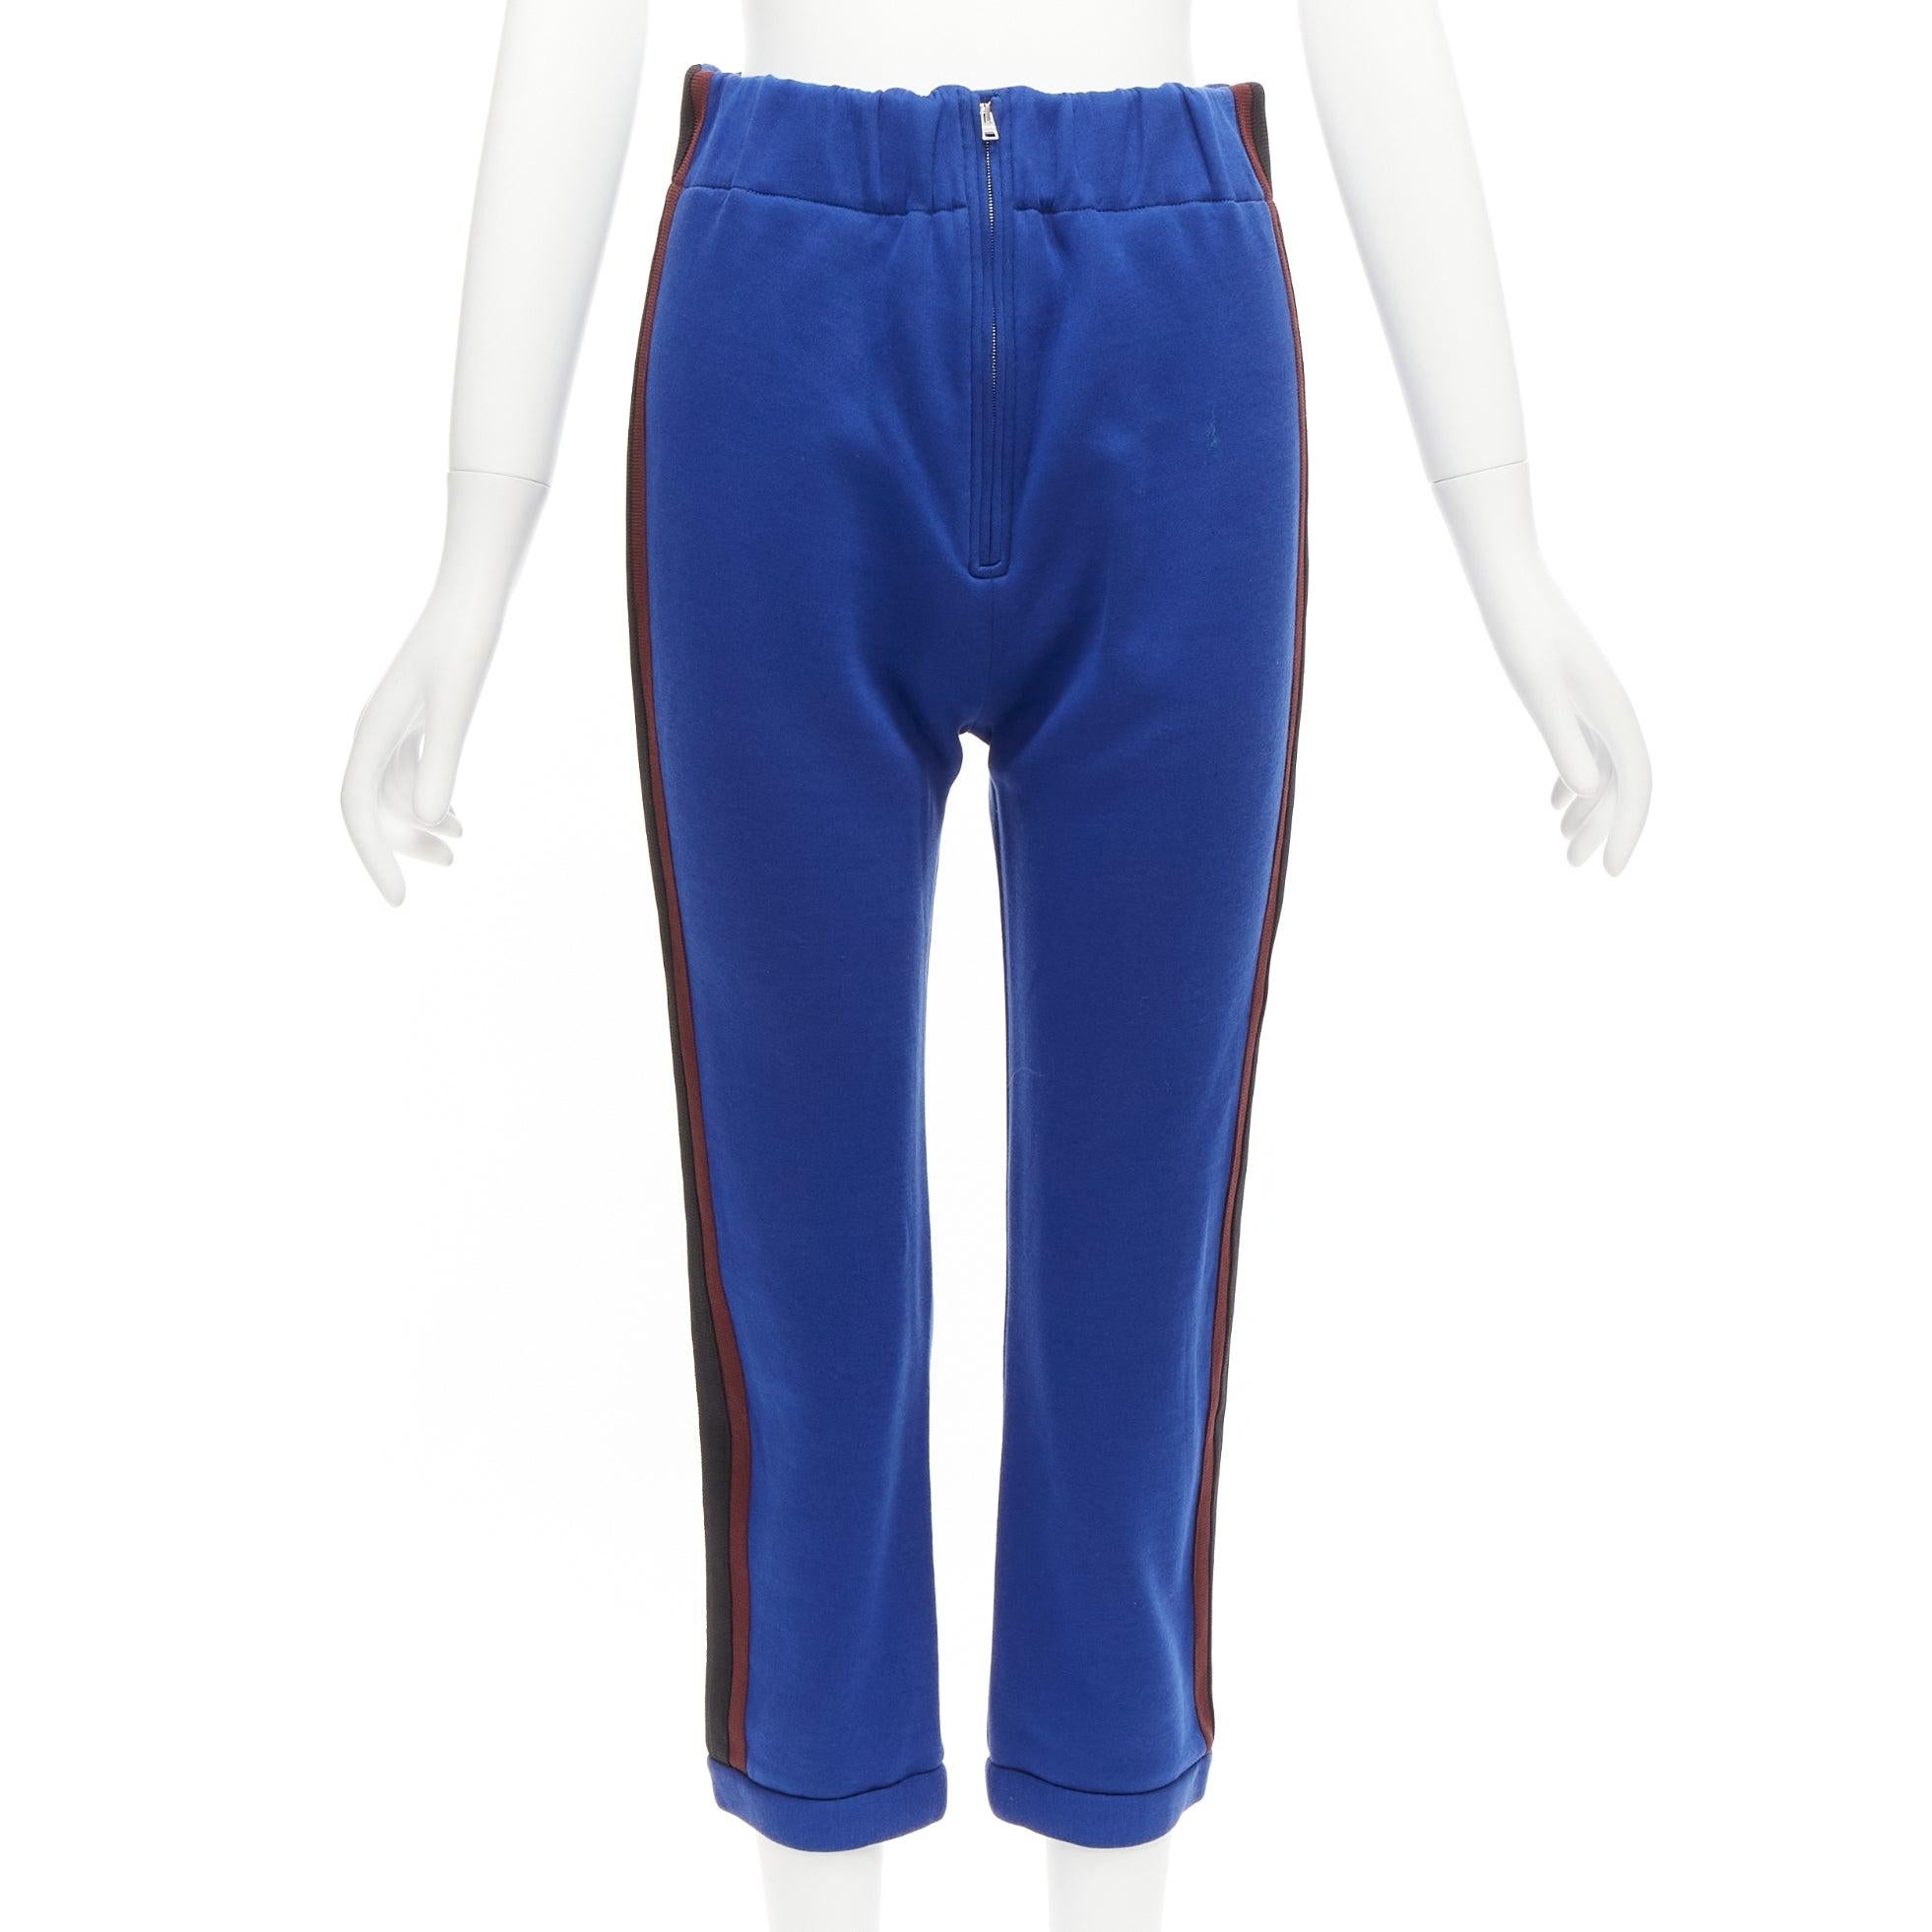 MARNI blue cotton blend brown black tape tapered joggers IT38 XS
Reference: CELG/A00259
Brand: Marni
Material: Cotton, Blend
Color: Blue, Multicolour
Pattern: Solid
Closure: Zip
Extra Details: Front zip closure.
Made in: Italy

CONDITION:
Condition: